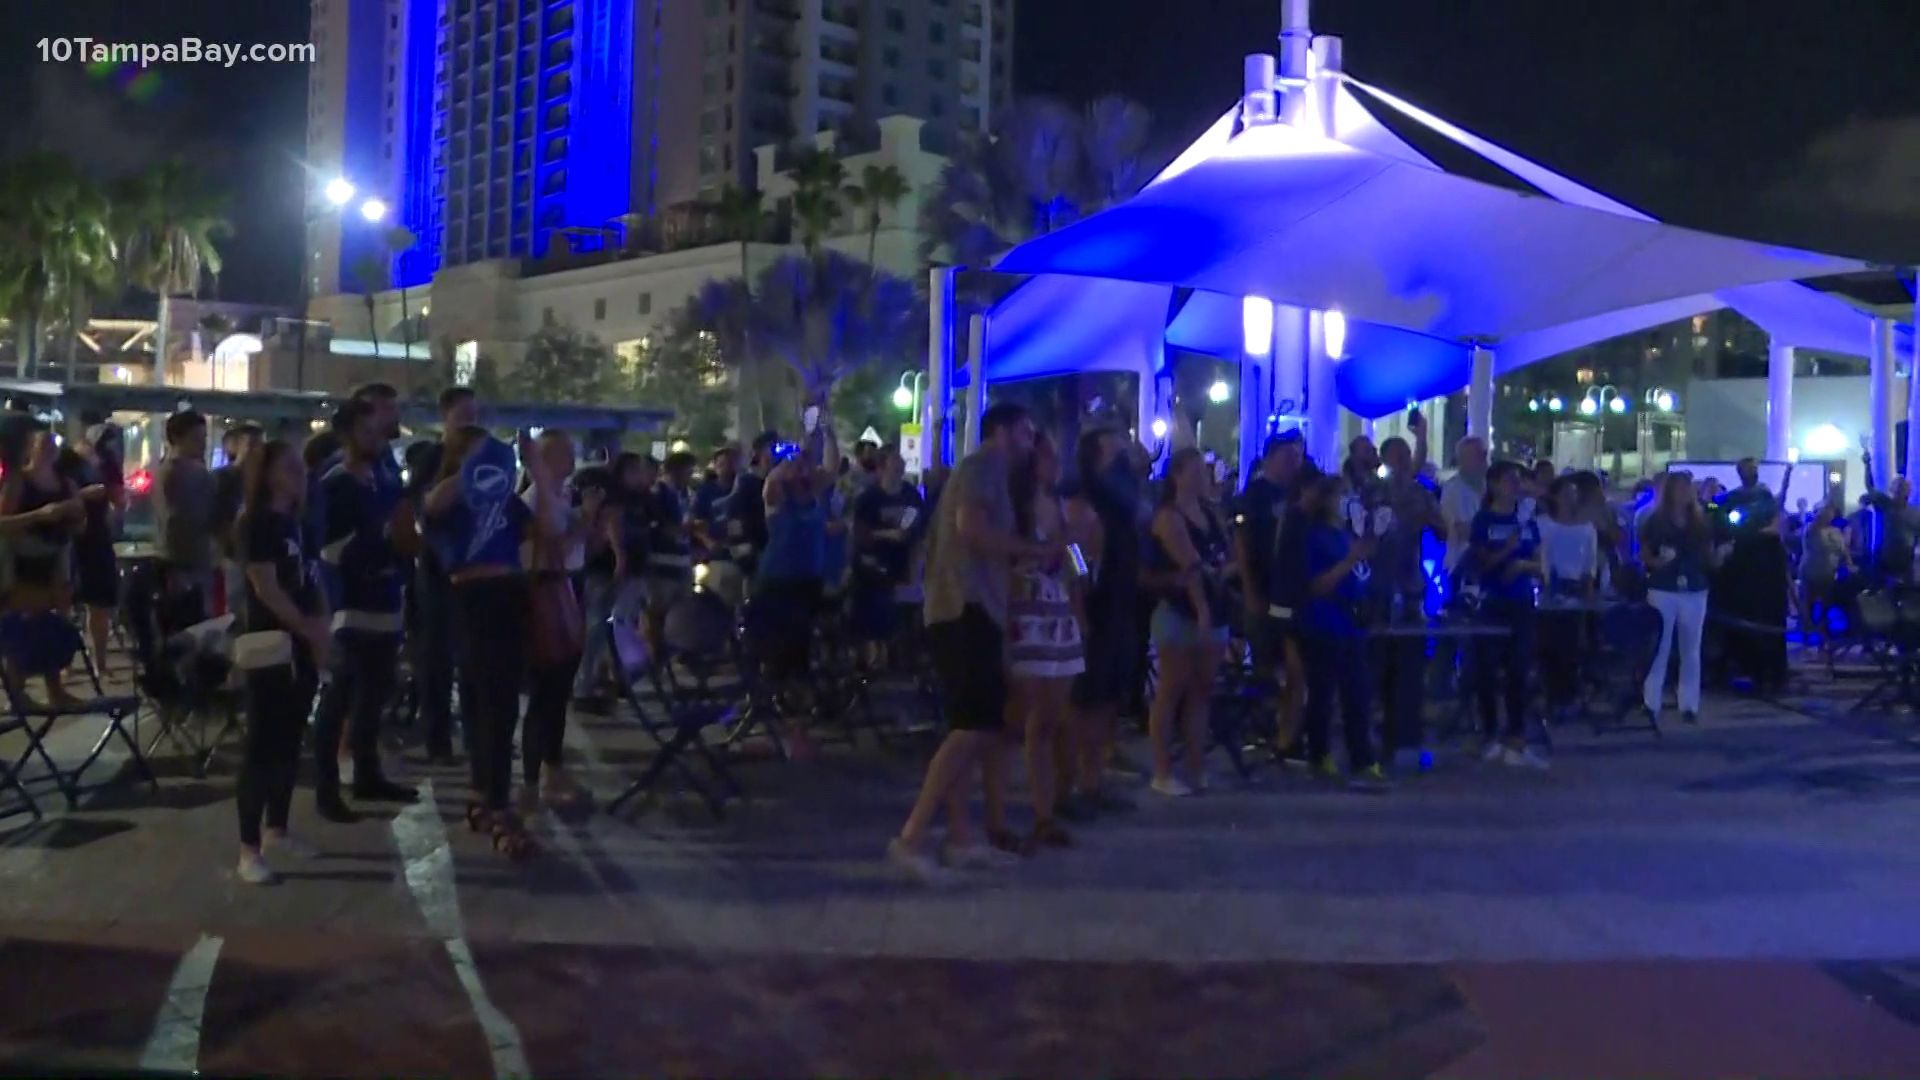 The Tampa Bay Lightning are the champions of bubble hockey, and Tampa Bay is celebrating!